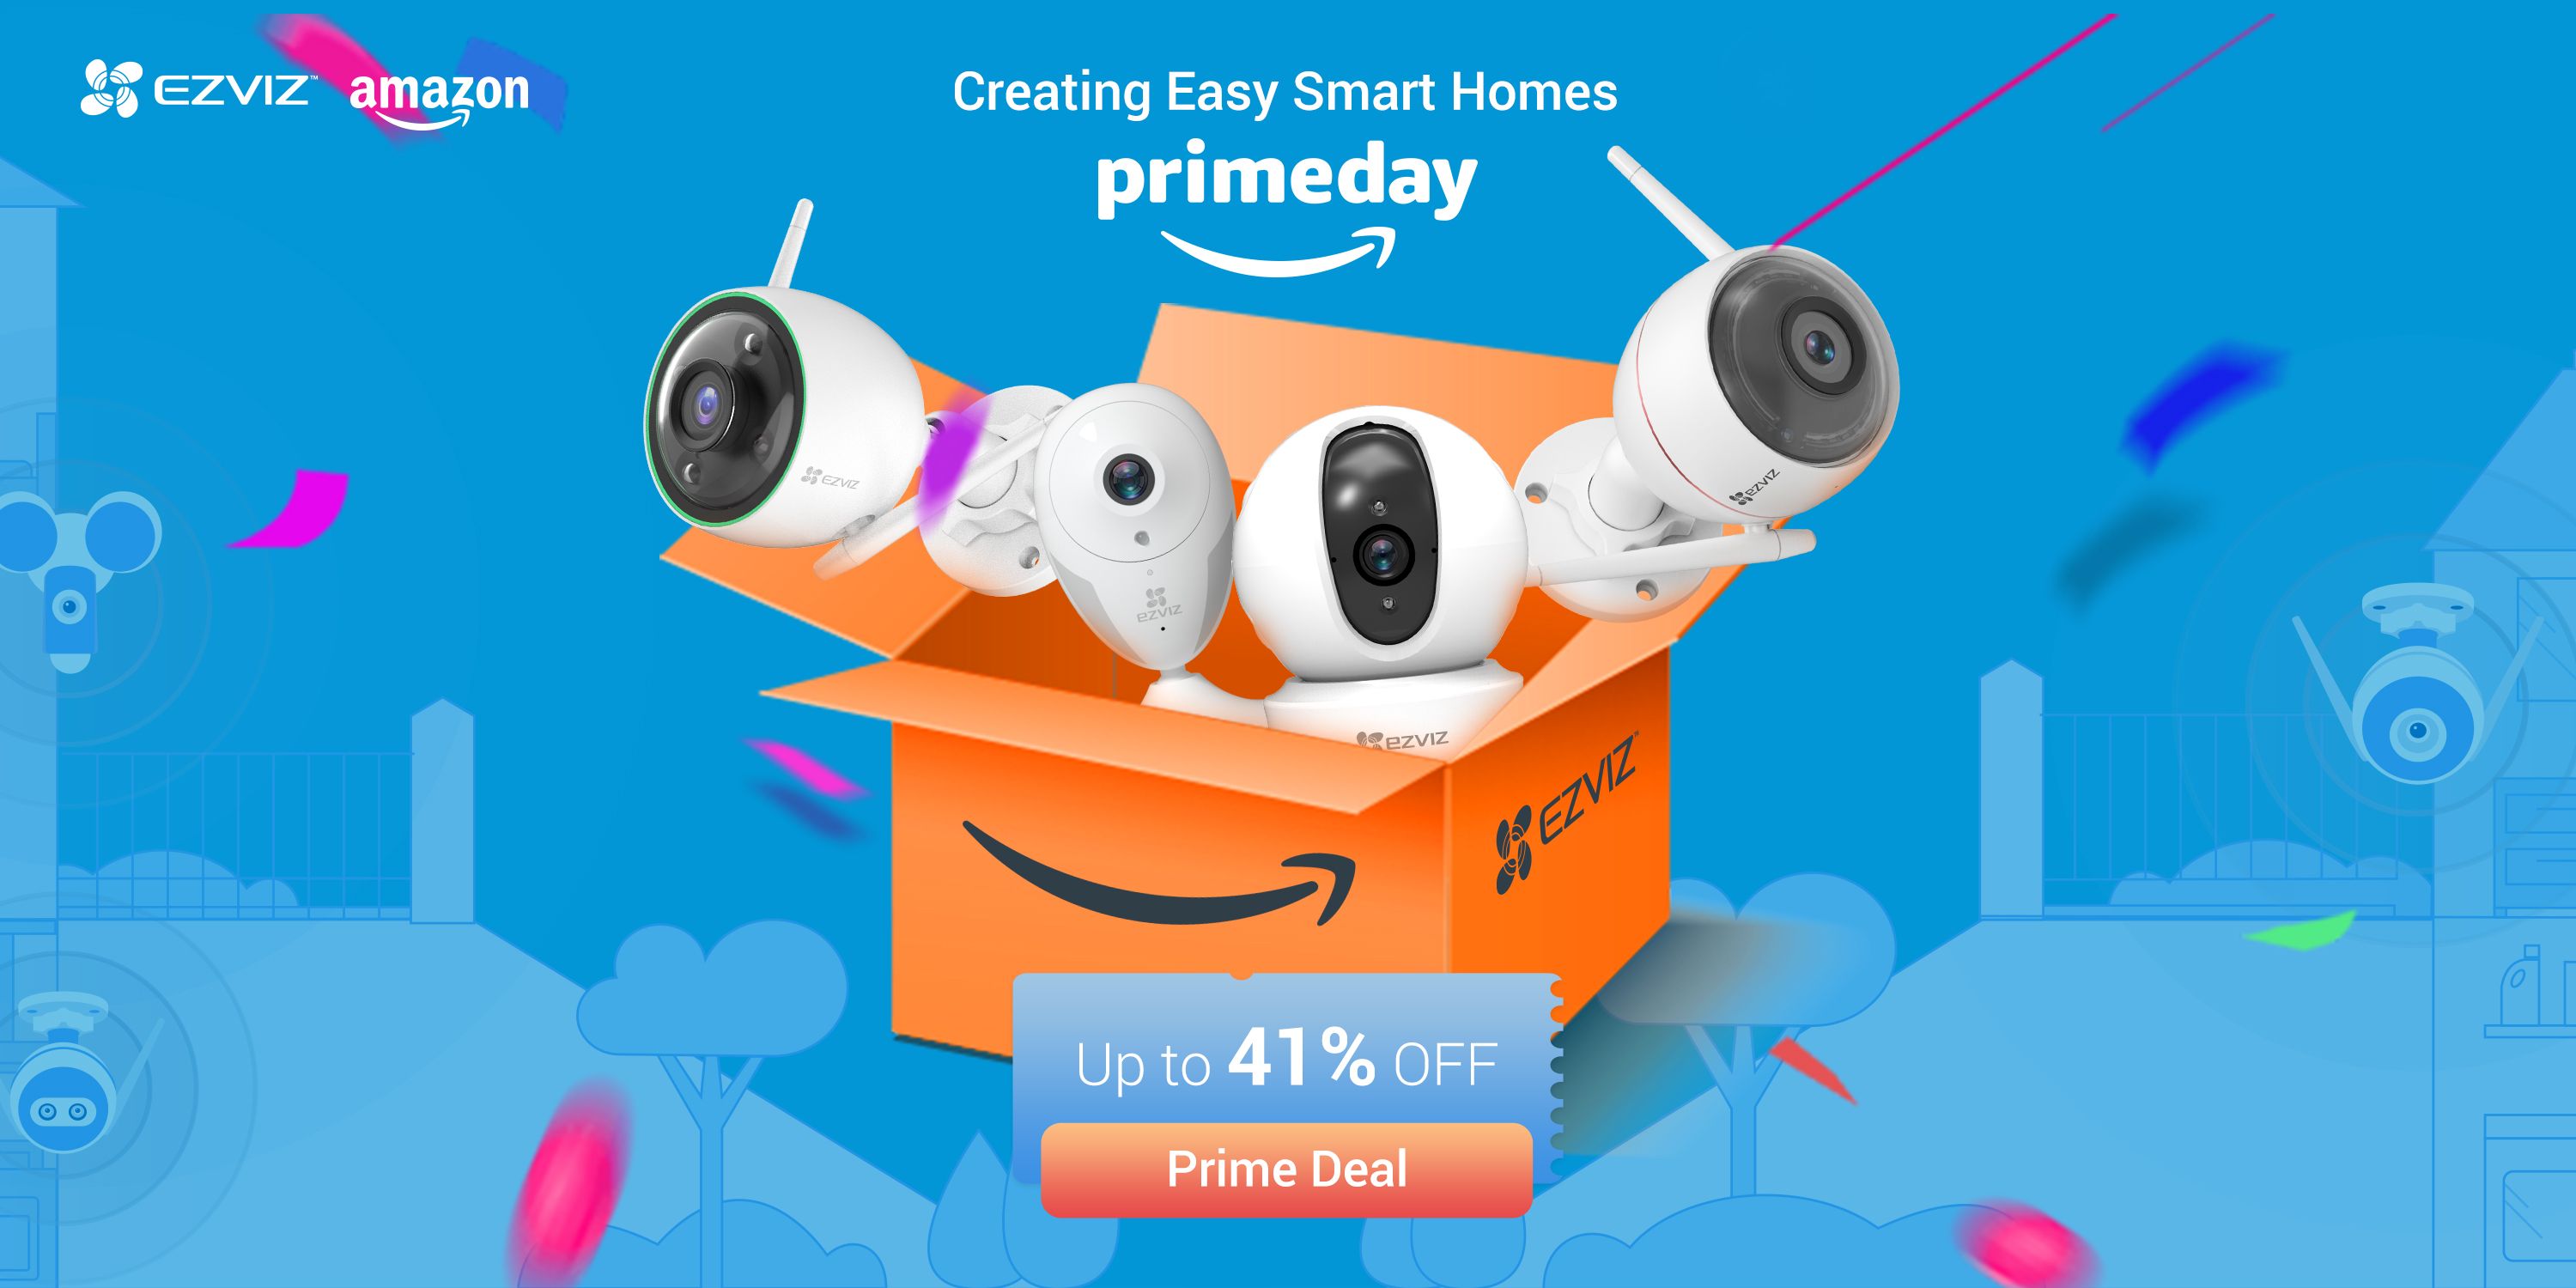 EZVIZ has some superb deals on smart home security for Prime Day photo 6